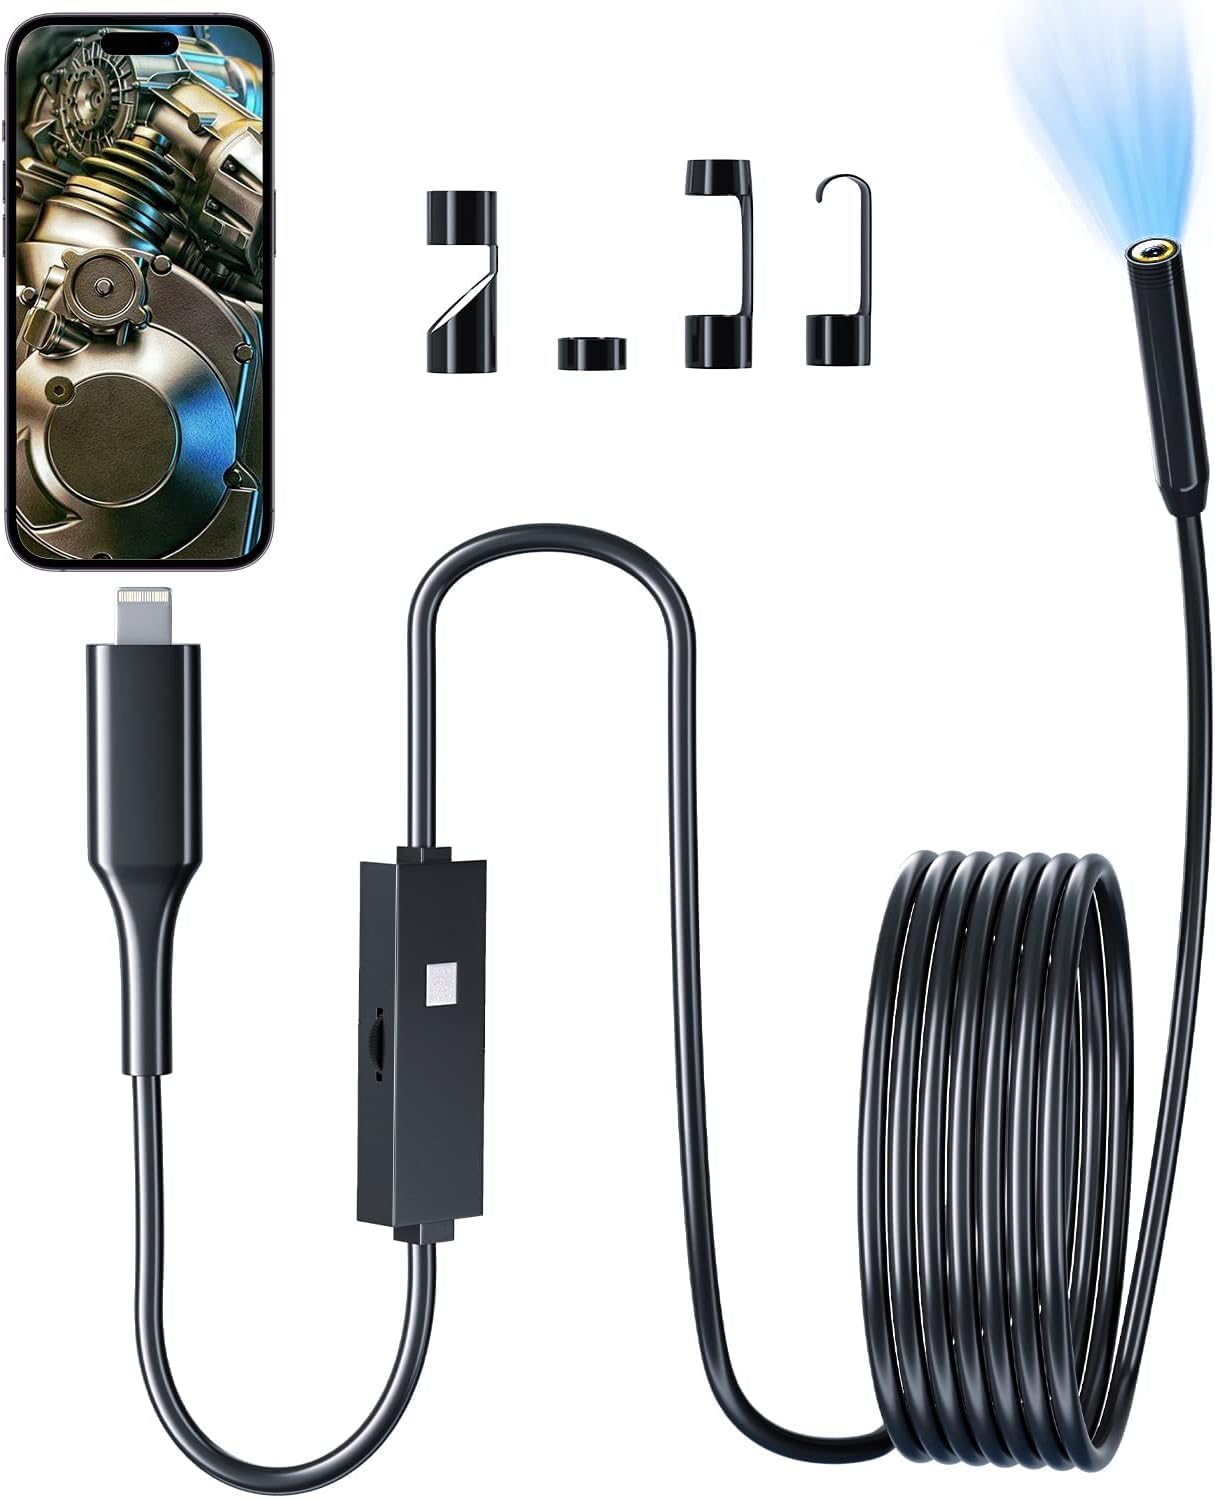 Endoscope Camera with Light, 1920P HD Borescope with 8 Adjustable LED  Lights, Endoscope with 16.4ft Semi-Rigid Snake Camera, 7.9mm IP67  Waterproof